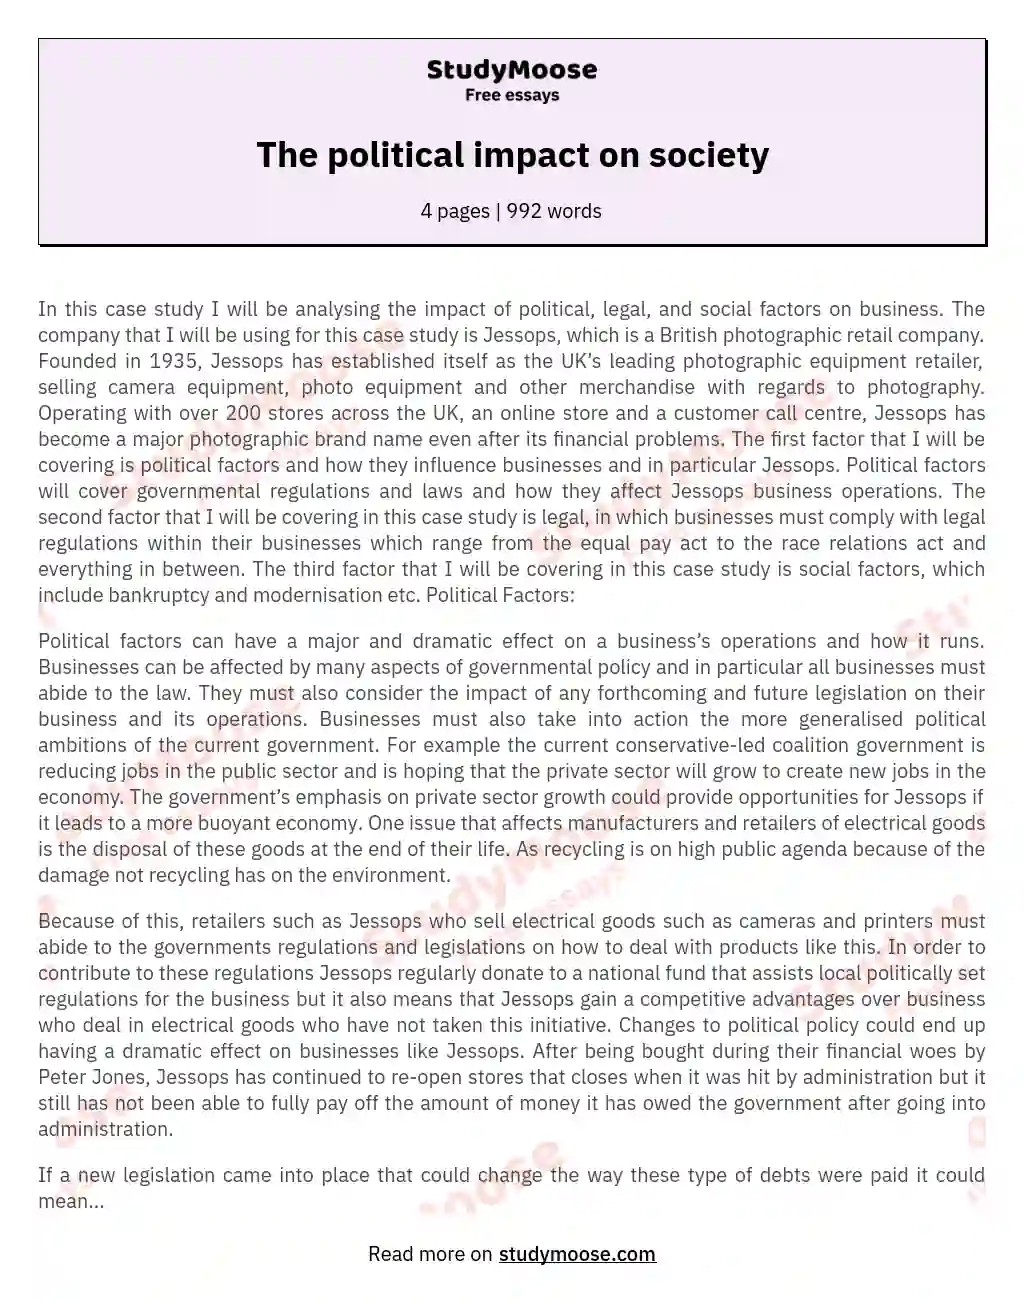 The political impact on society essay